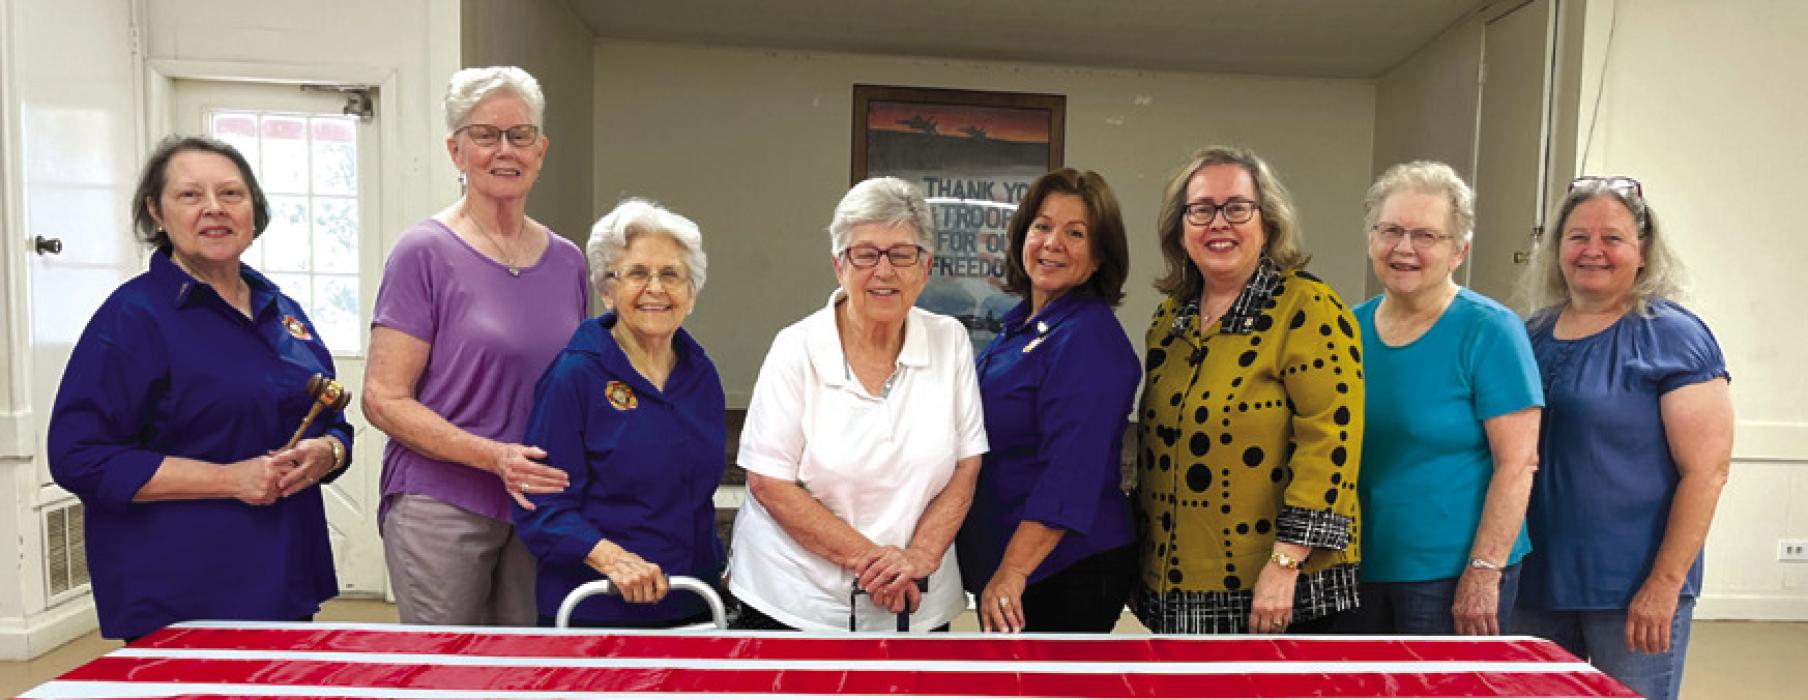 VFW Post No. 5254 Auxiliary Installs Offi cers